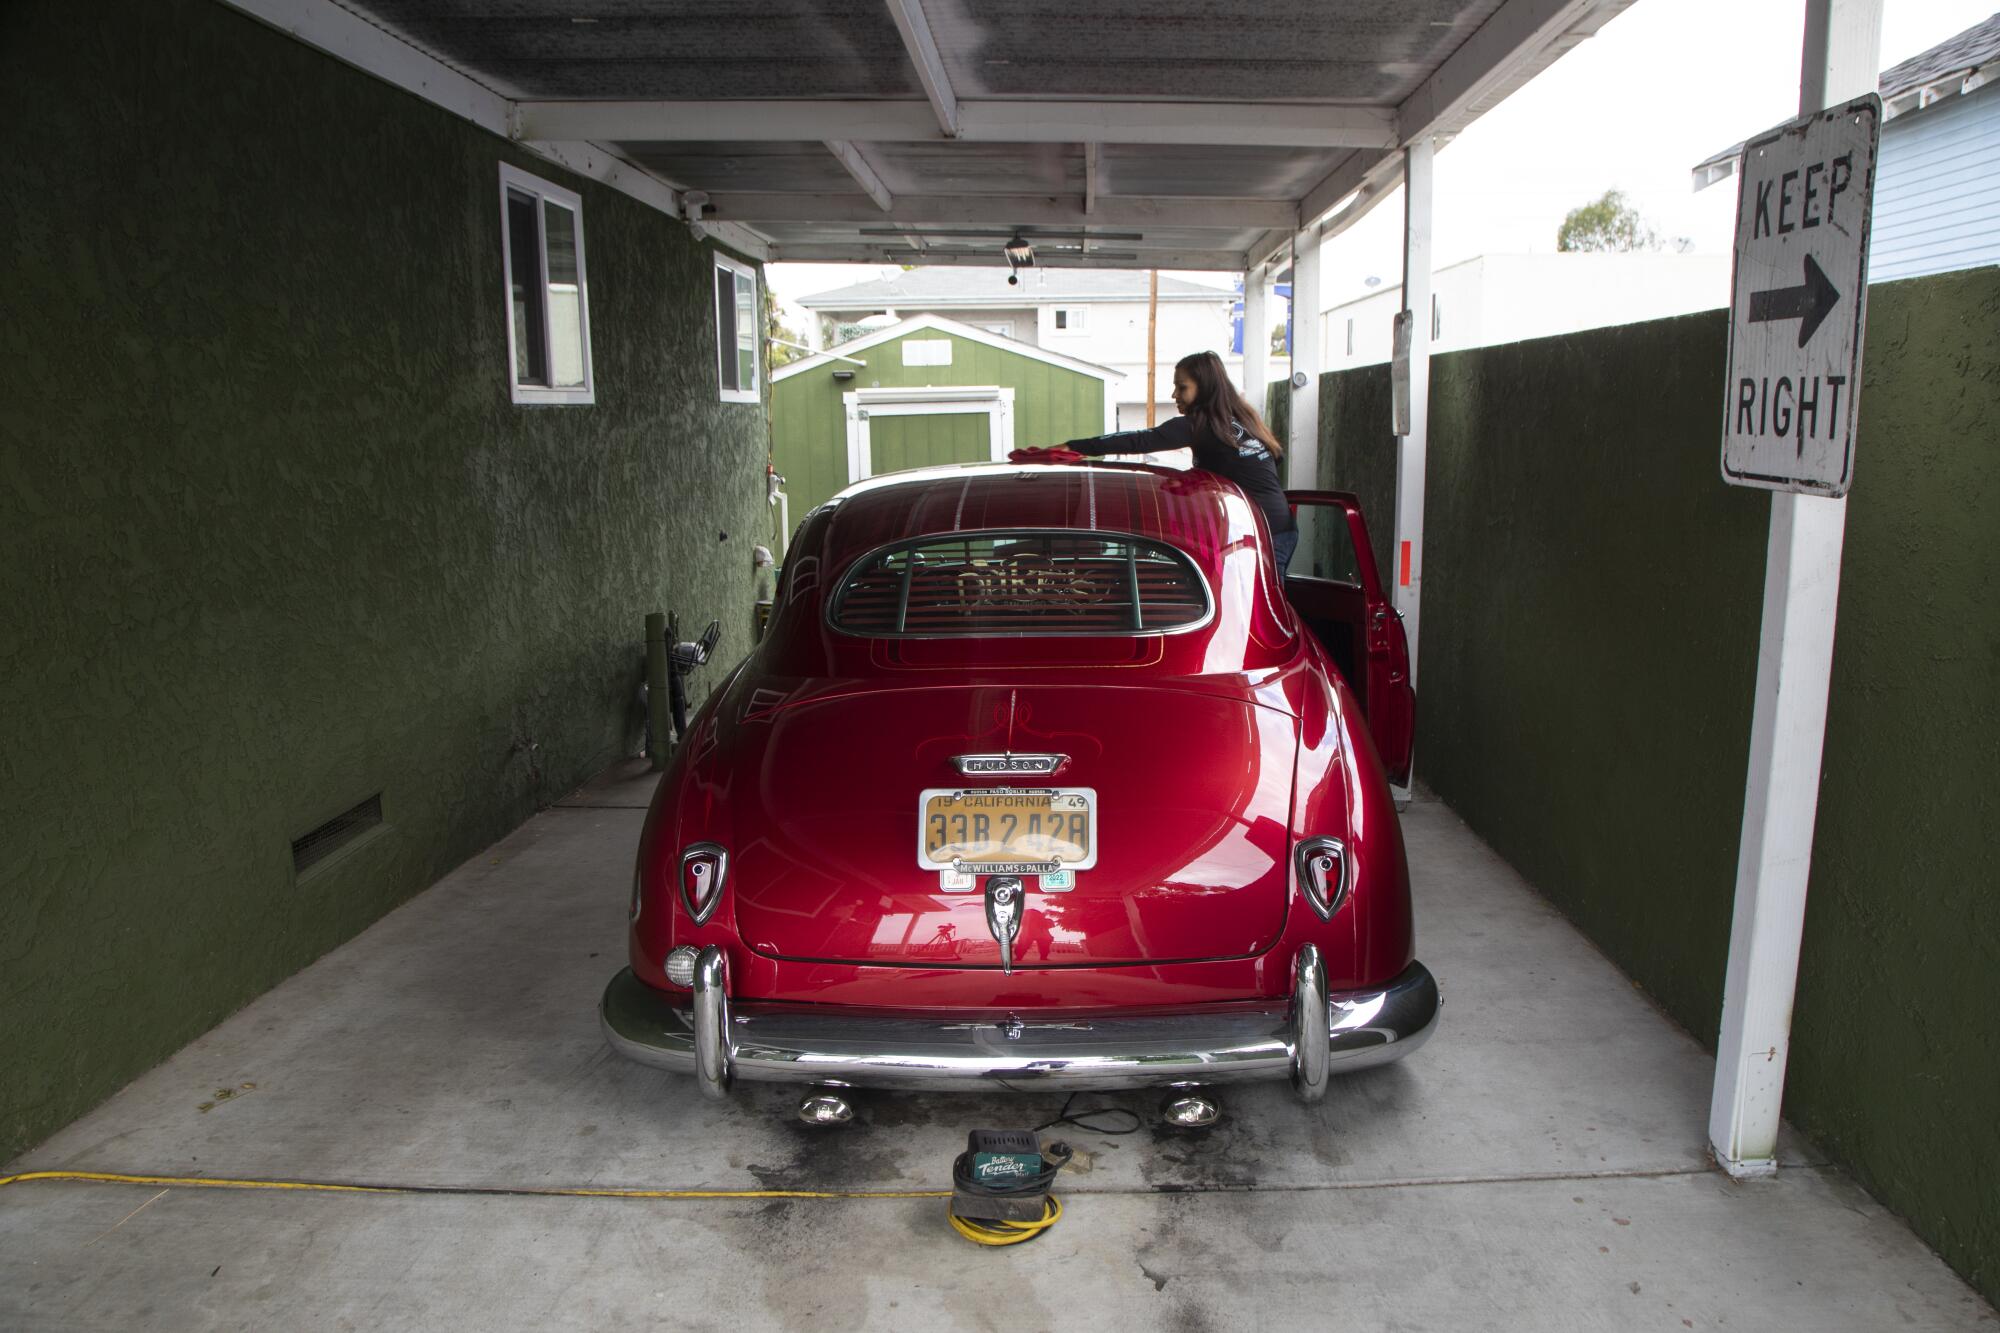 Marisa Rosales, a founding member of the United Lowrider Coalition, does a quick cleaning of her 1949 Hudson Brougham.